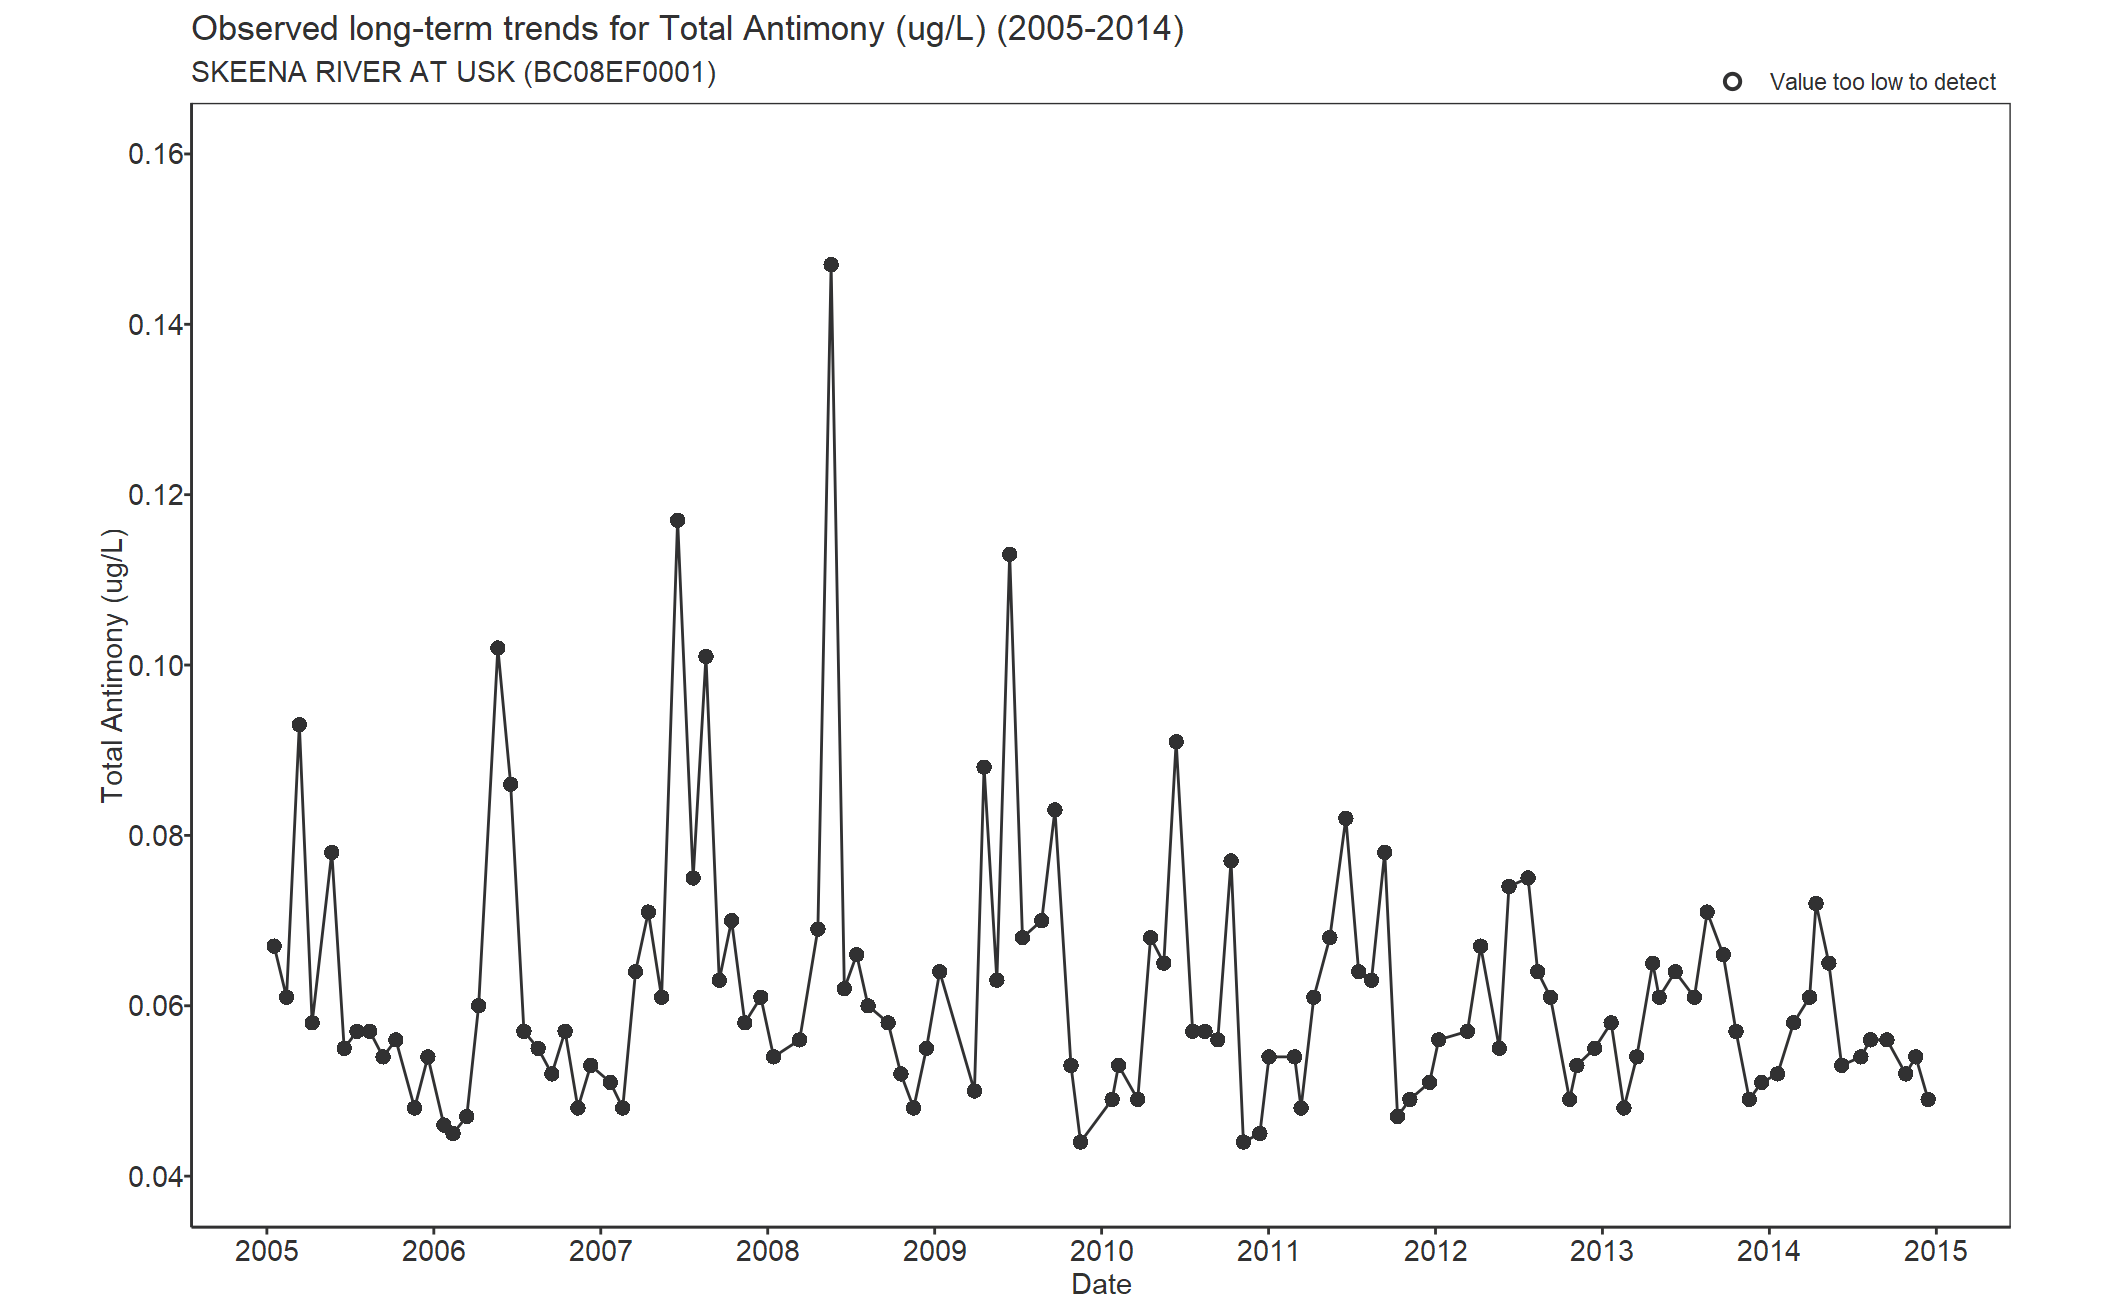 Observed long-term trends for Total Antimony (2005-2014)